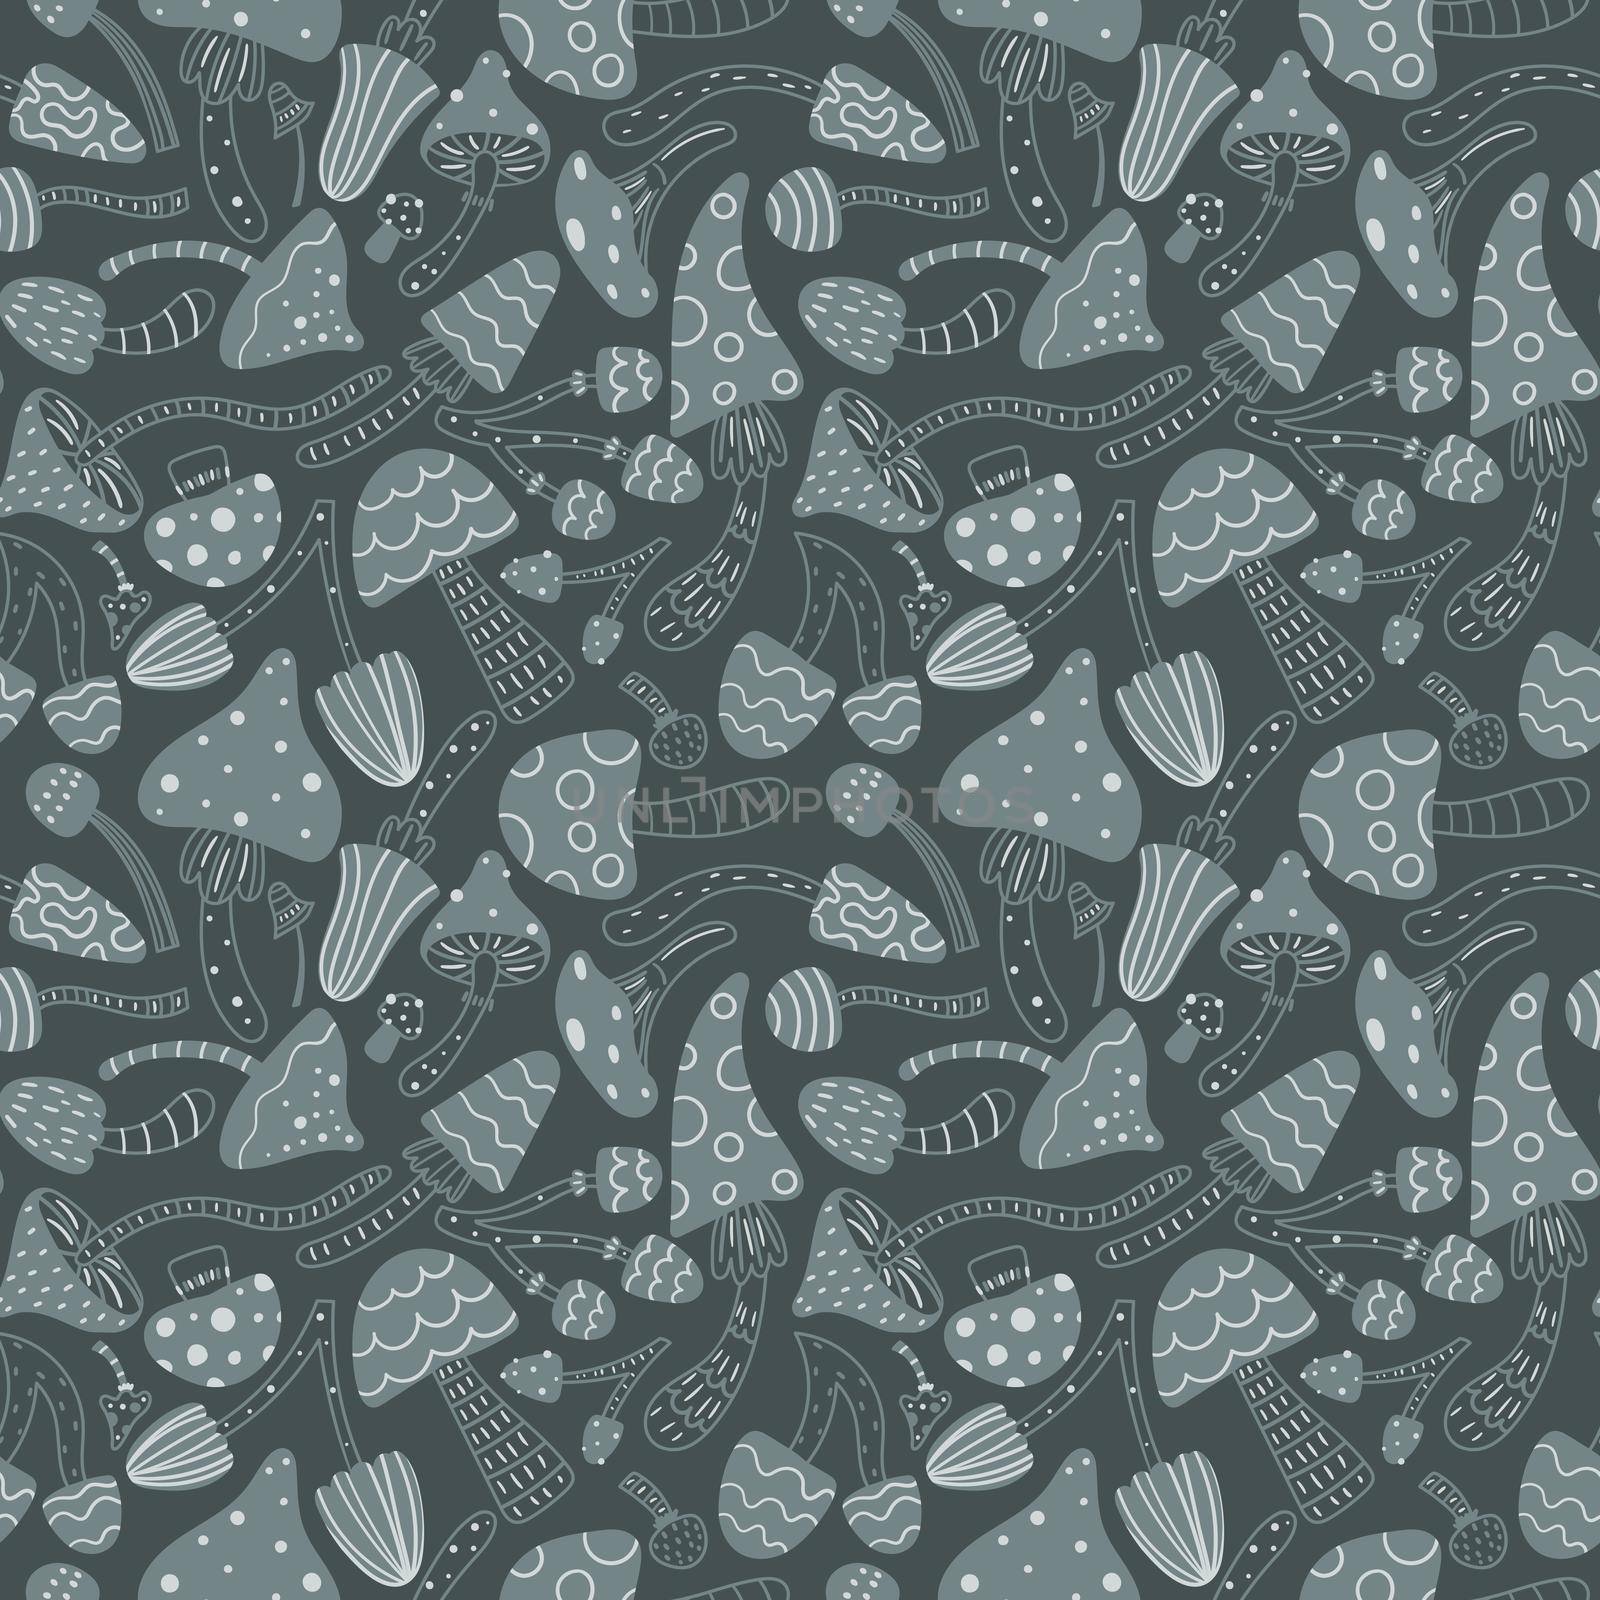 Autumn seamless background with mushrooms on a dark gray background. Scandinavian style. Ideal for fabric, wrapping paper, seasonal decorations. by Lena_Khmelniuk